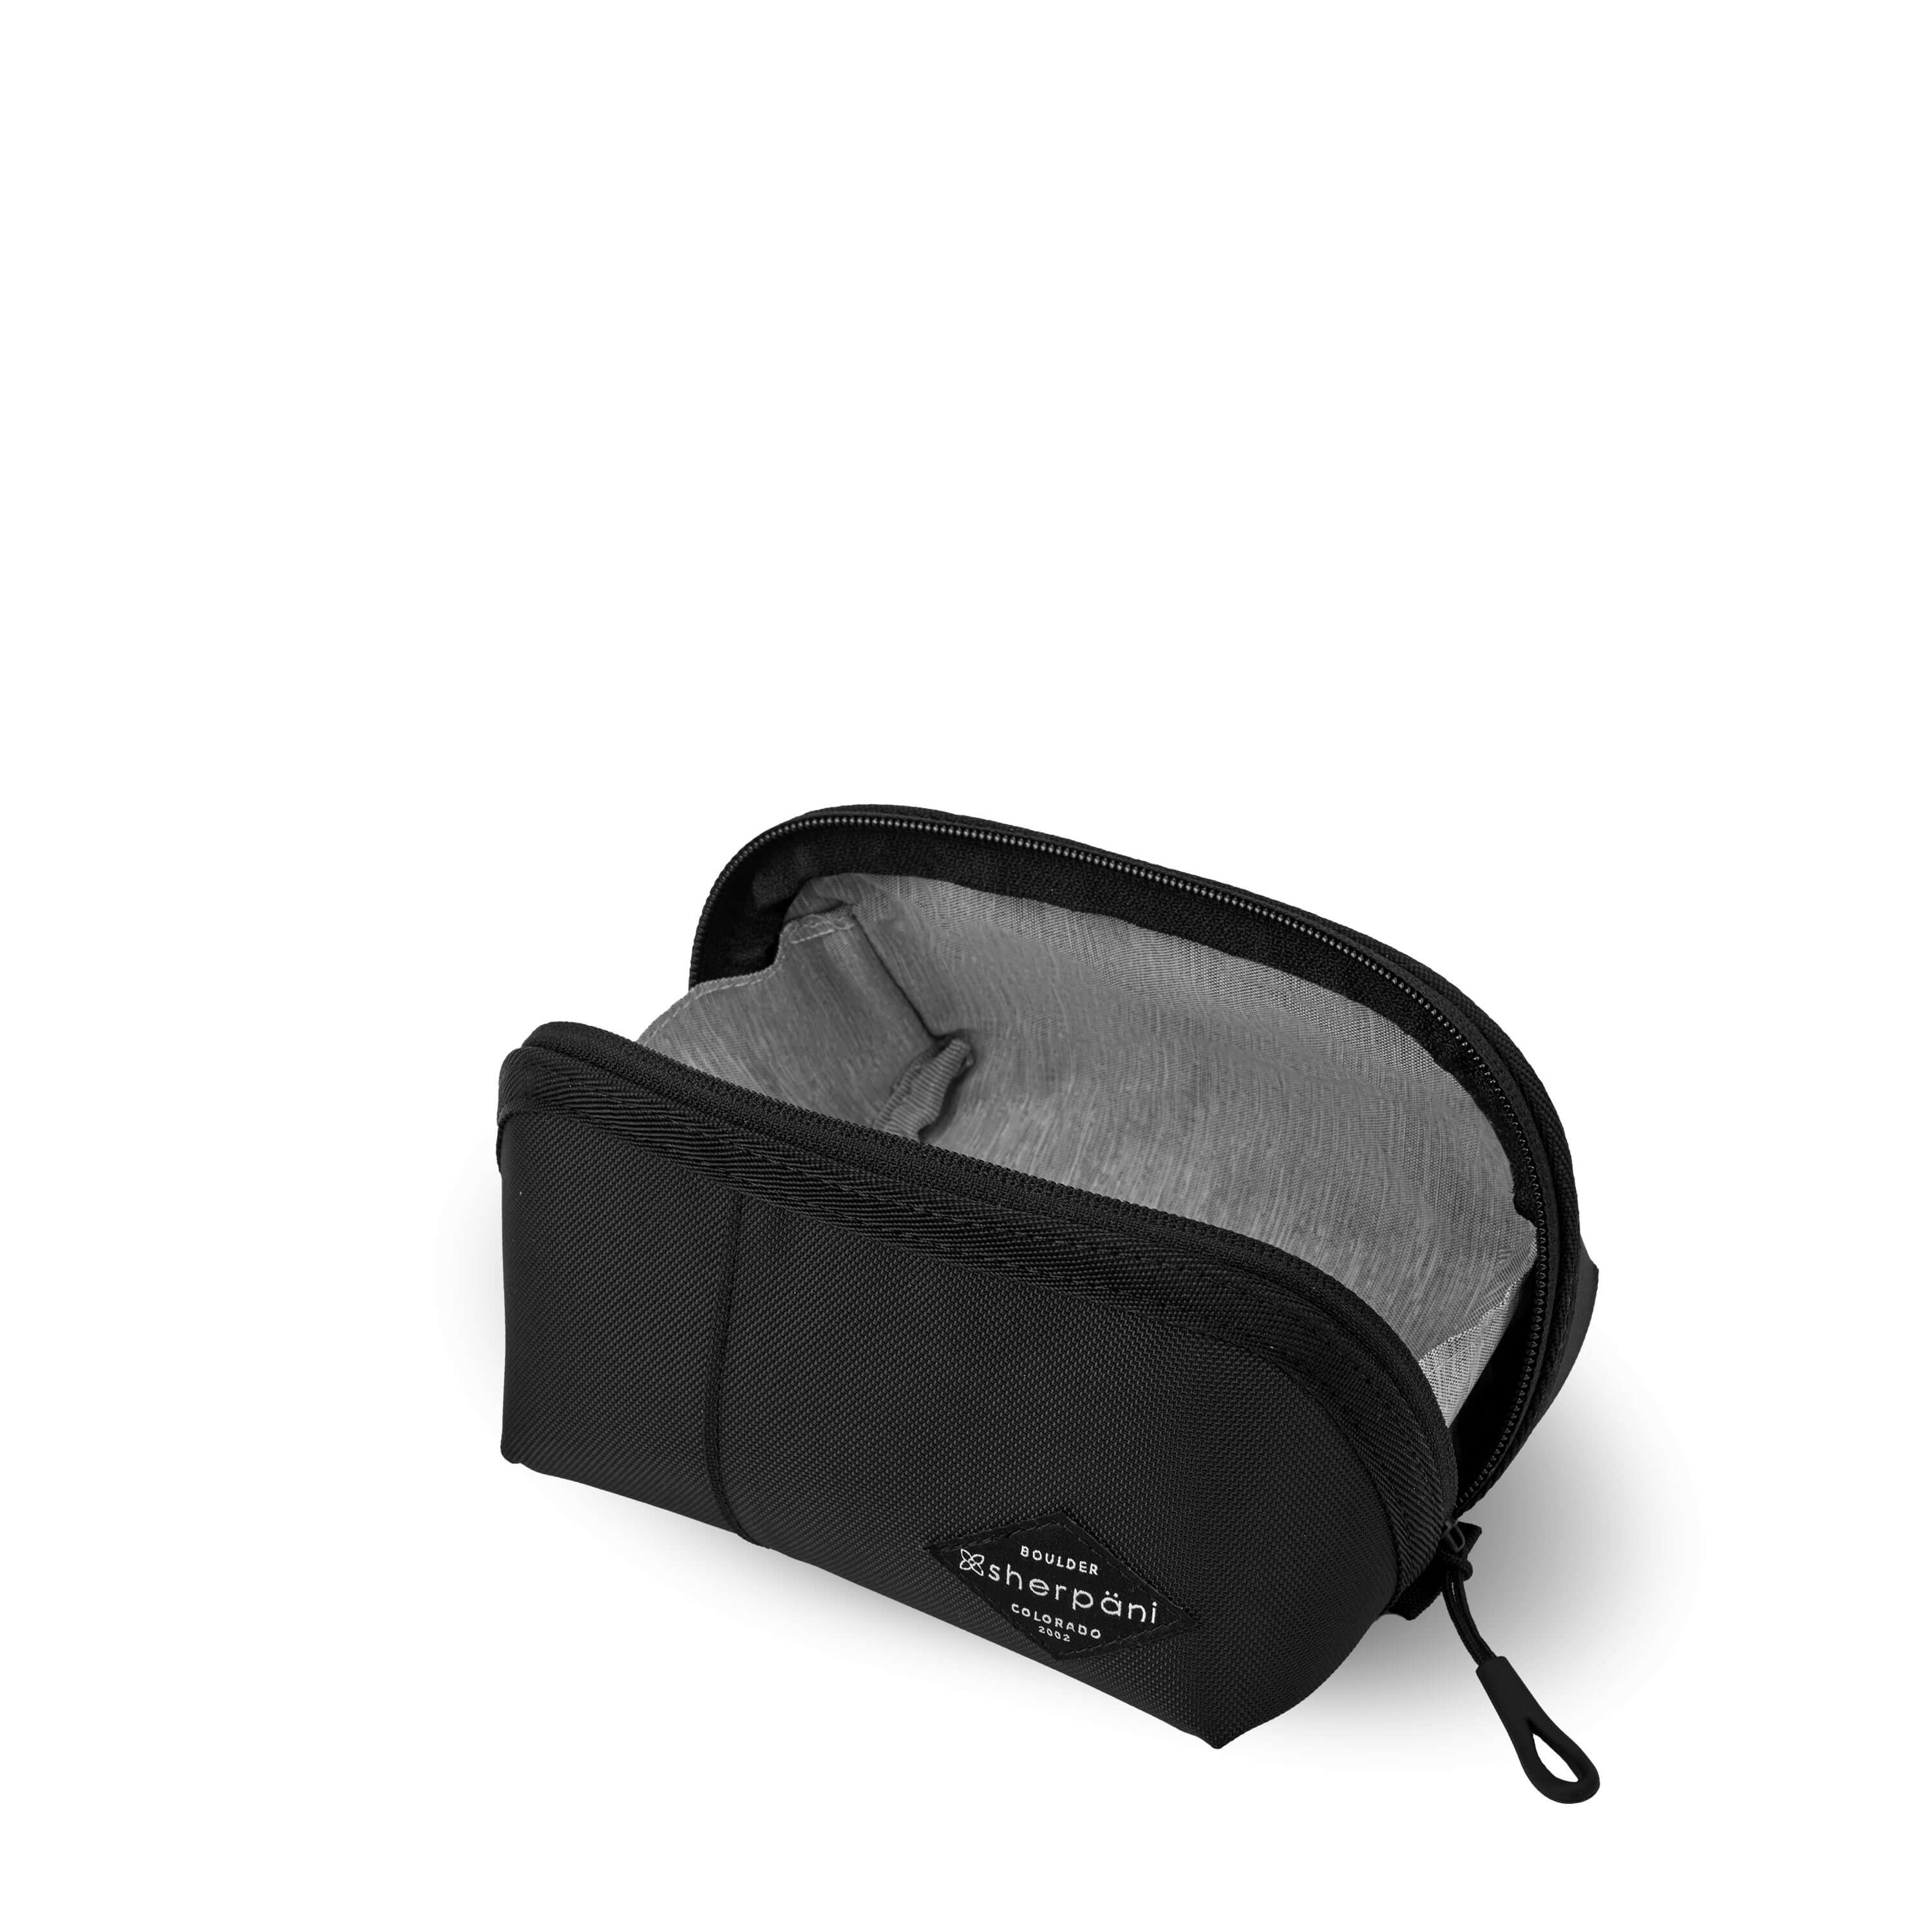 Top view of Sherpani travel accessory the Harmony in Raven. The pouch is unzipped to reveal a light gray interior.